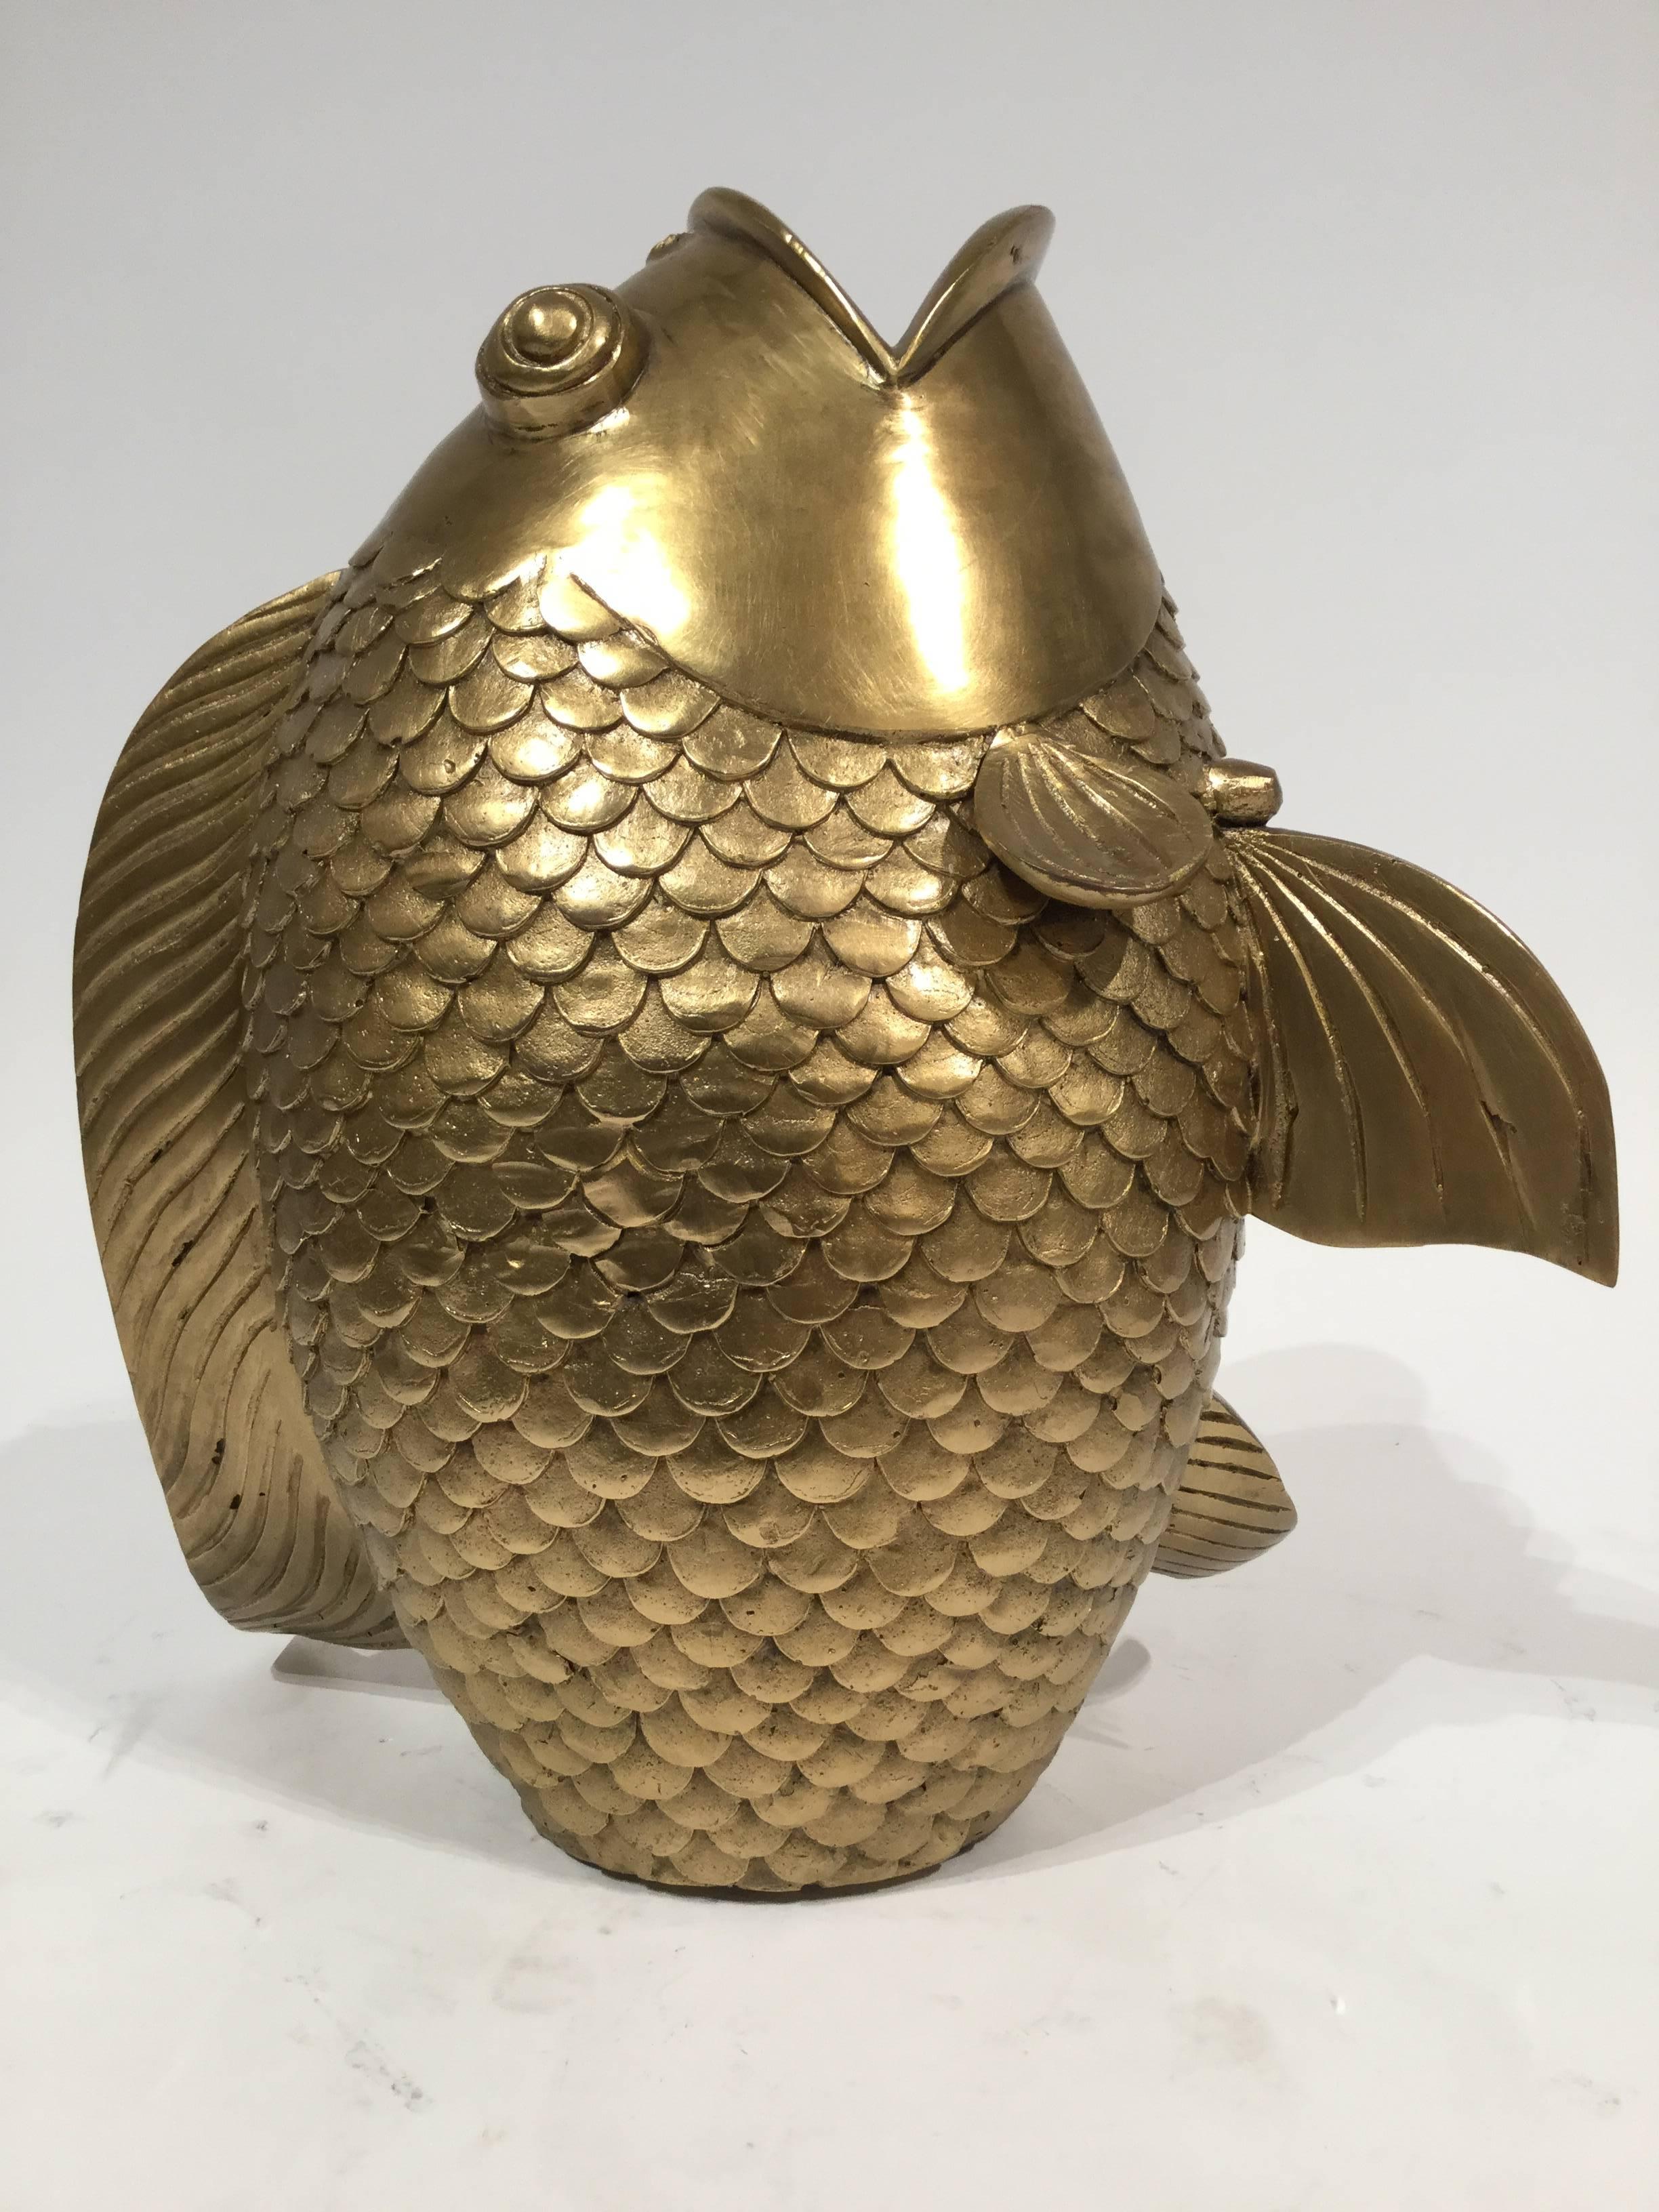 20th Century Italian Sculpture in Bronze in the Form of a Fish, 1970